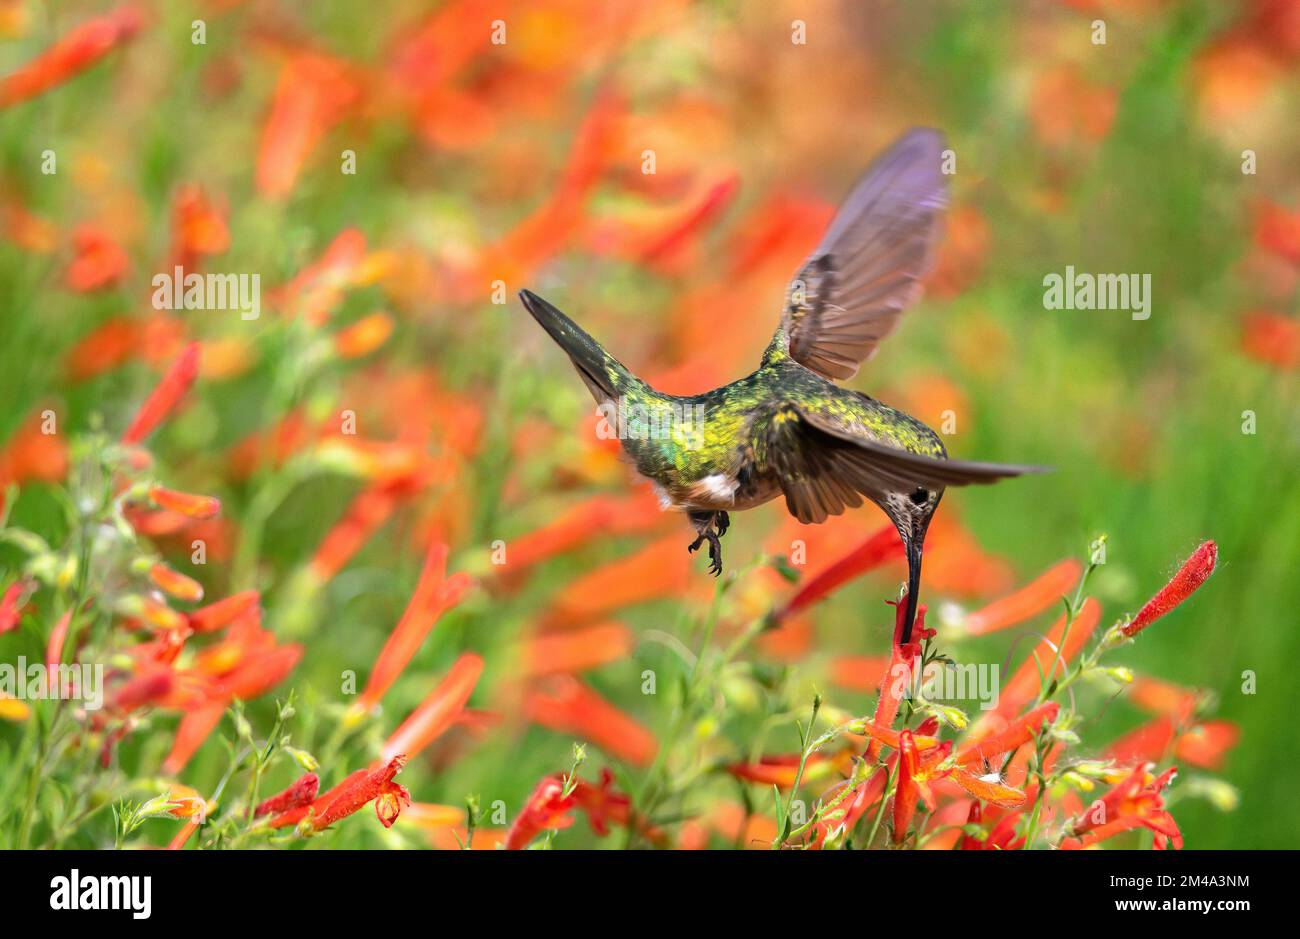 A Broad-tailed Hummingbird sipping nectar from an Orange Penstemon flower. Stock Photo